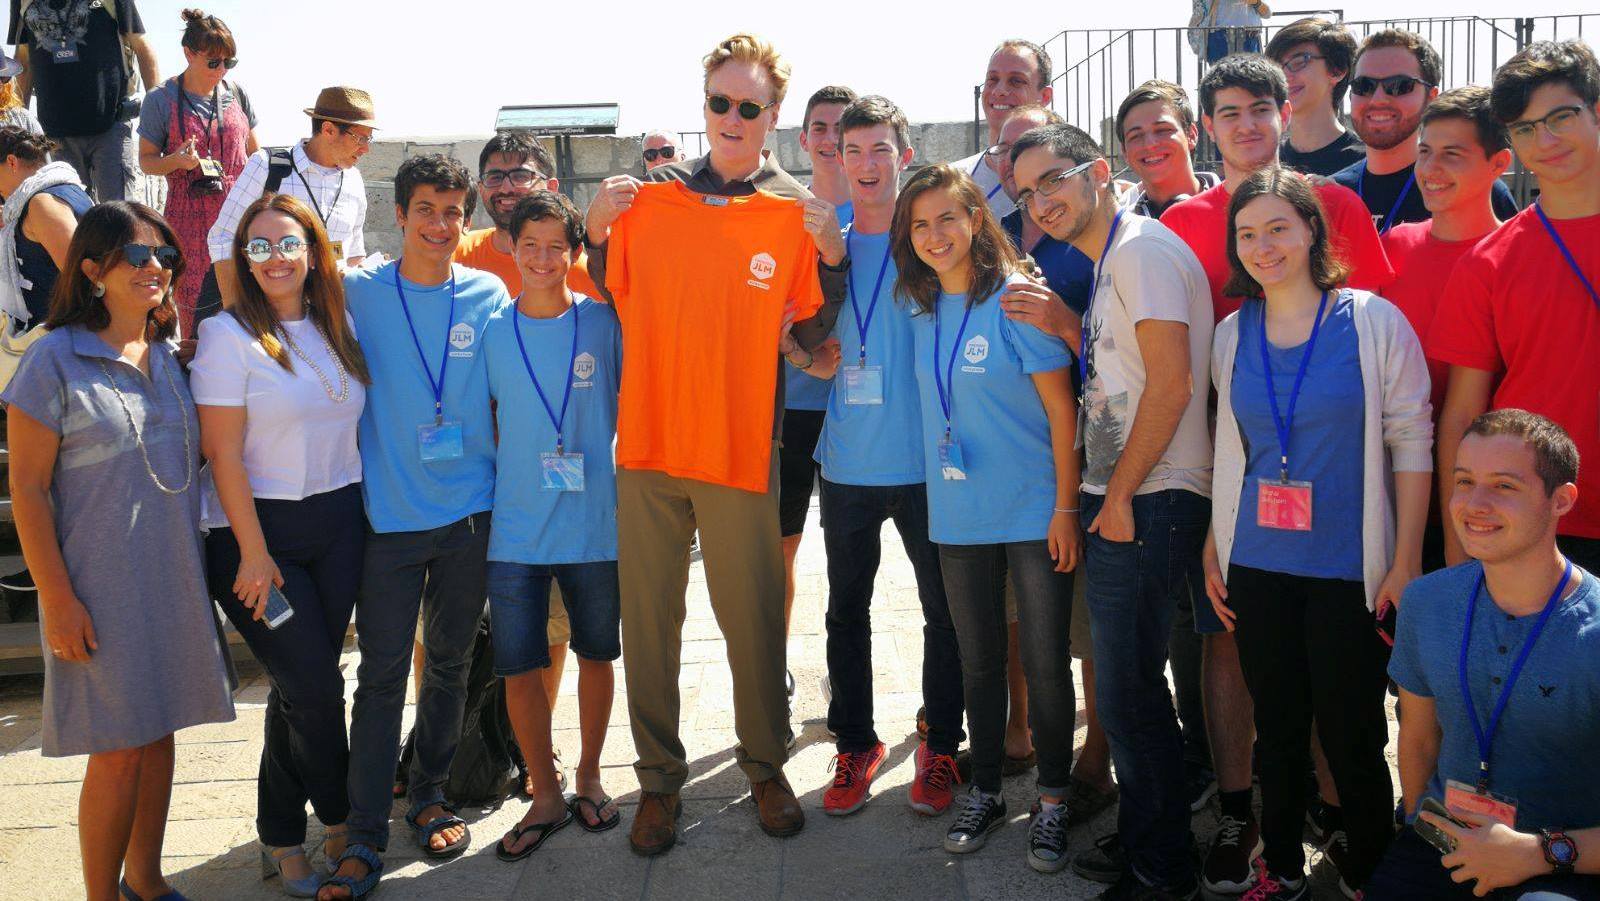 Conan O’Brien makes a surprise visit to the Tomorrow JLM teen hackathon at the Tower of David Museum, August 28, 2017. Photo: courtesy